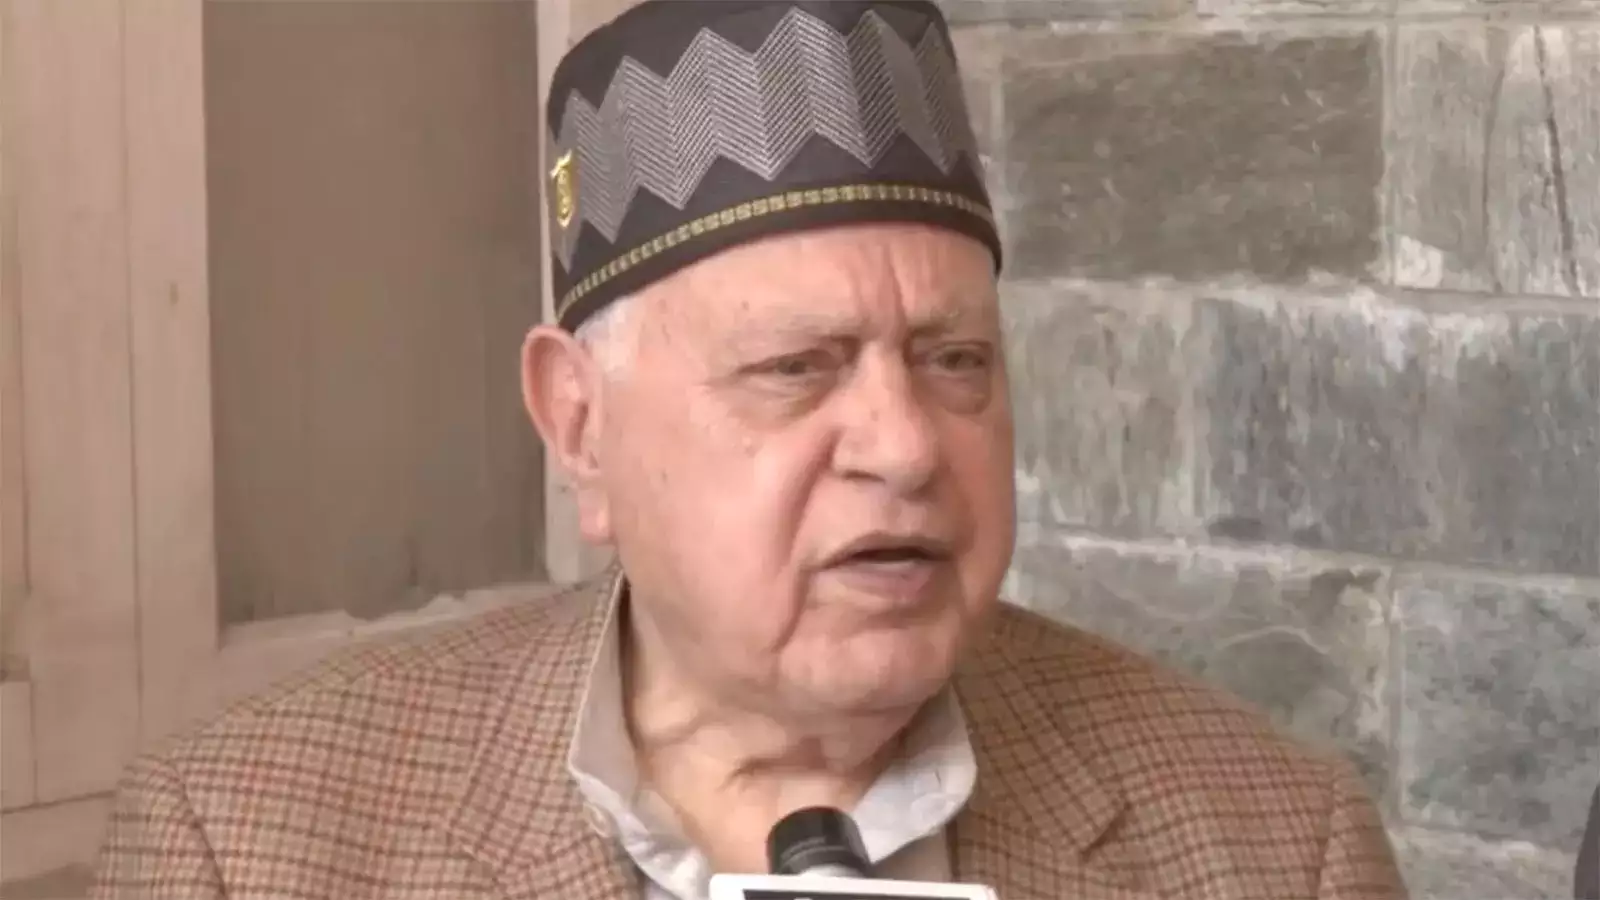 Farooq Abdullah says, “A stronger Pakistan is better for India,” as protests over Imran Khan’s detention continue.